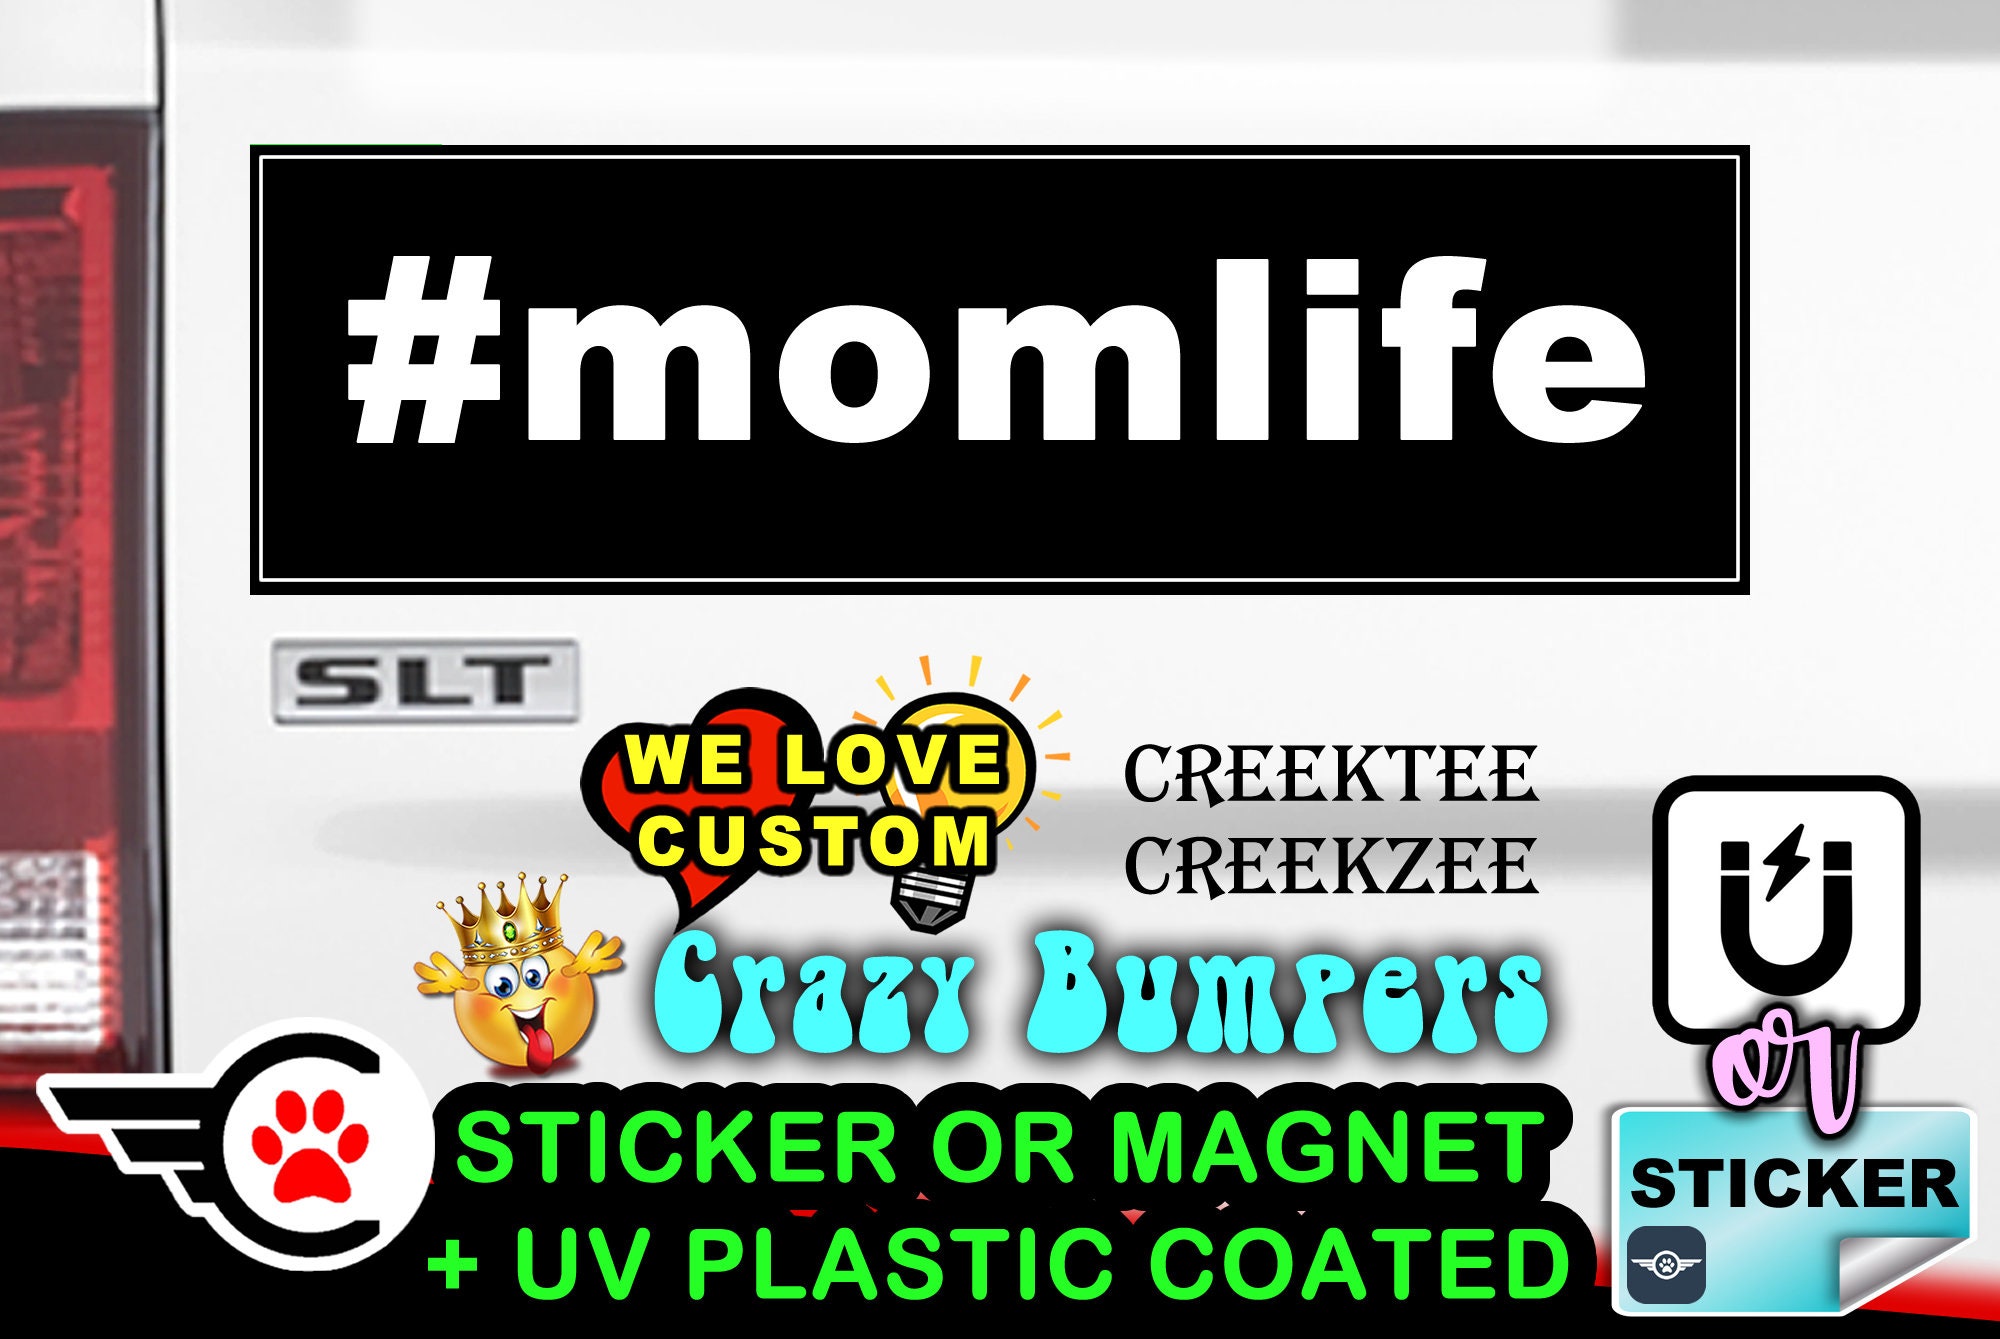 hashtag mom life Bumper Sticker or Magnet with your text, image or artwork, 8